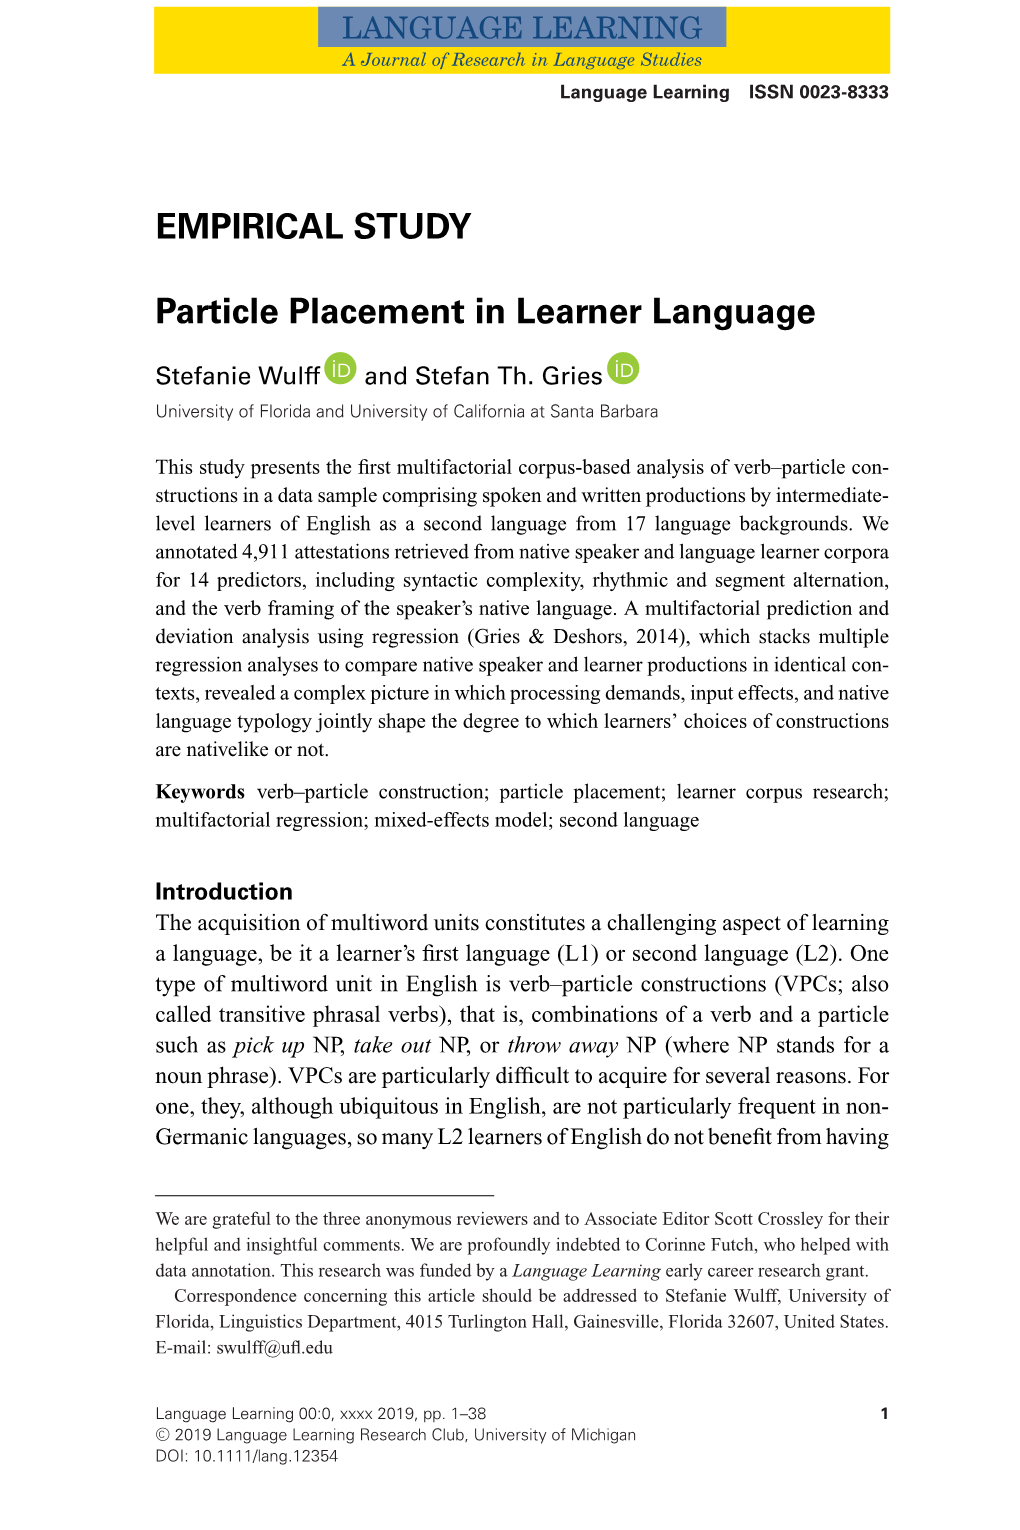 EMPIRICAL STUDY Particle Placement in Learner Language